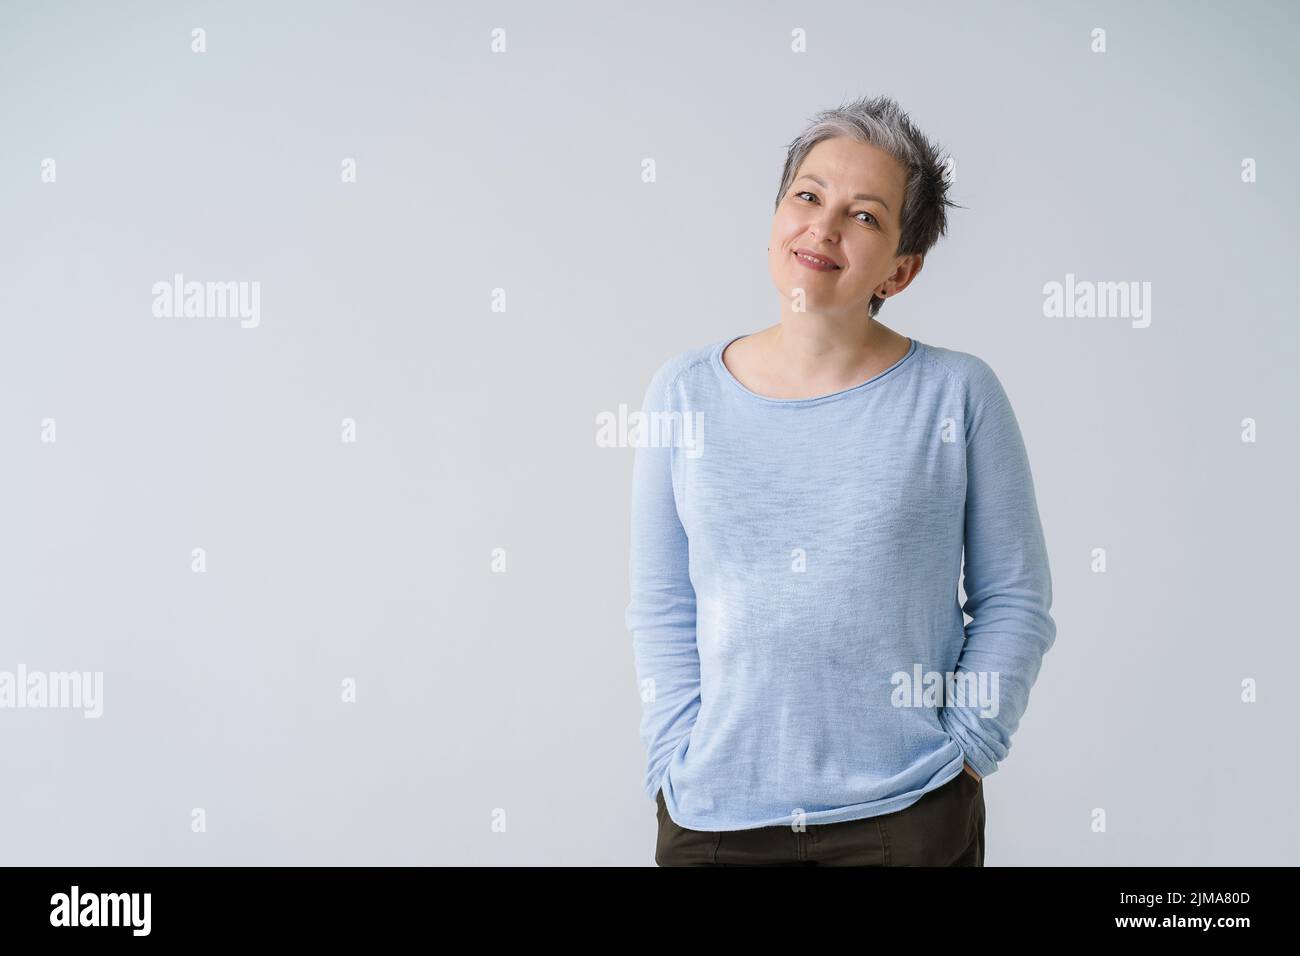 Happy dreamy mature grey haired woman 50s posing tenderly looking at camera with hands in pockets, copy space on left isolated on white background. Mature people healthcare.  Stock Photo